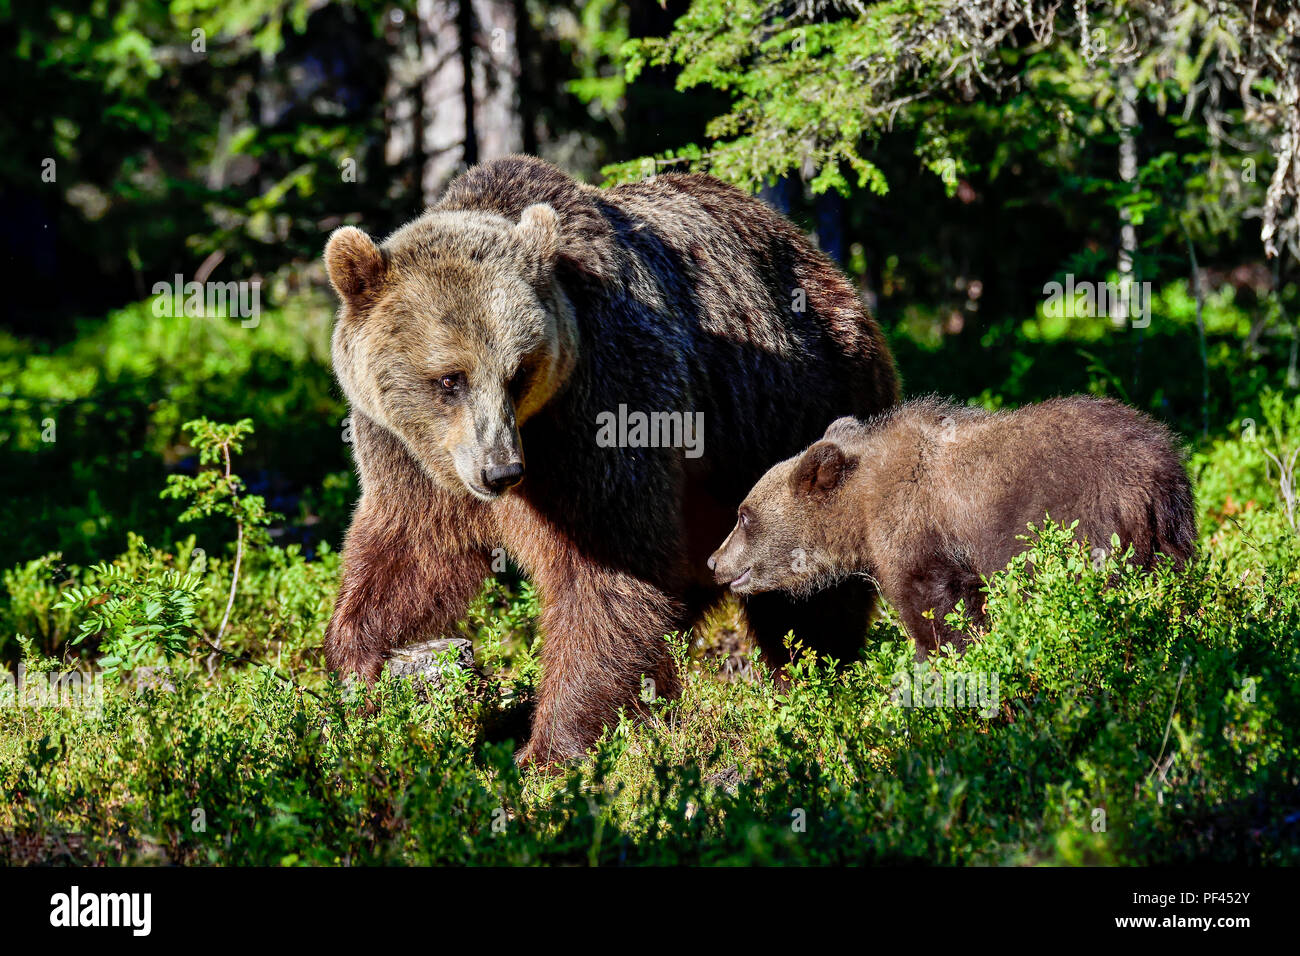 Brown bear mom with a cub in the forest. Stock Photo